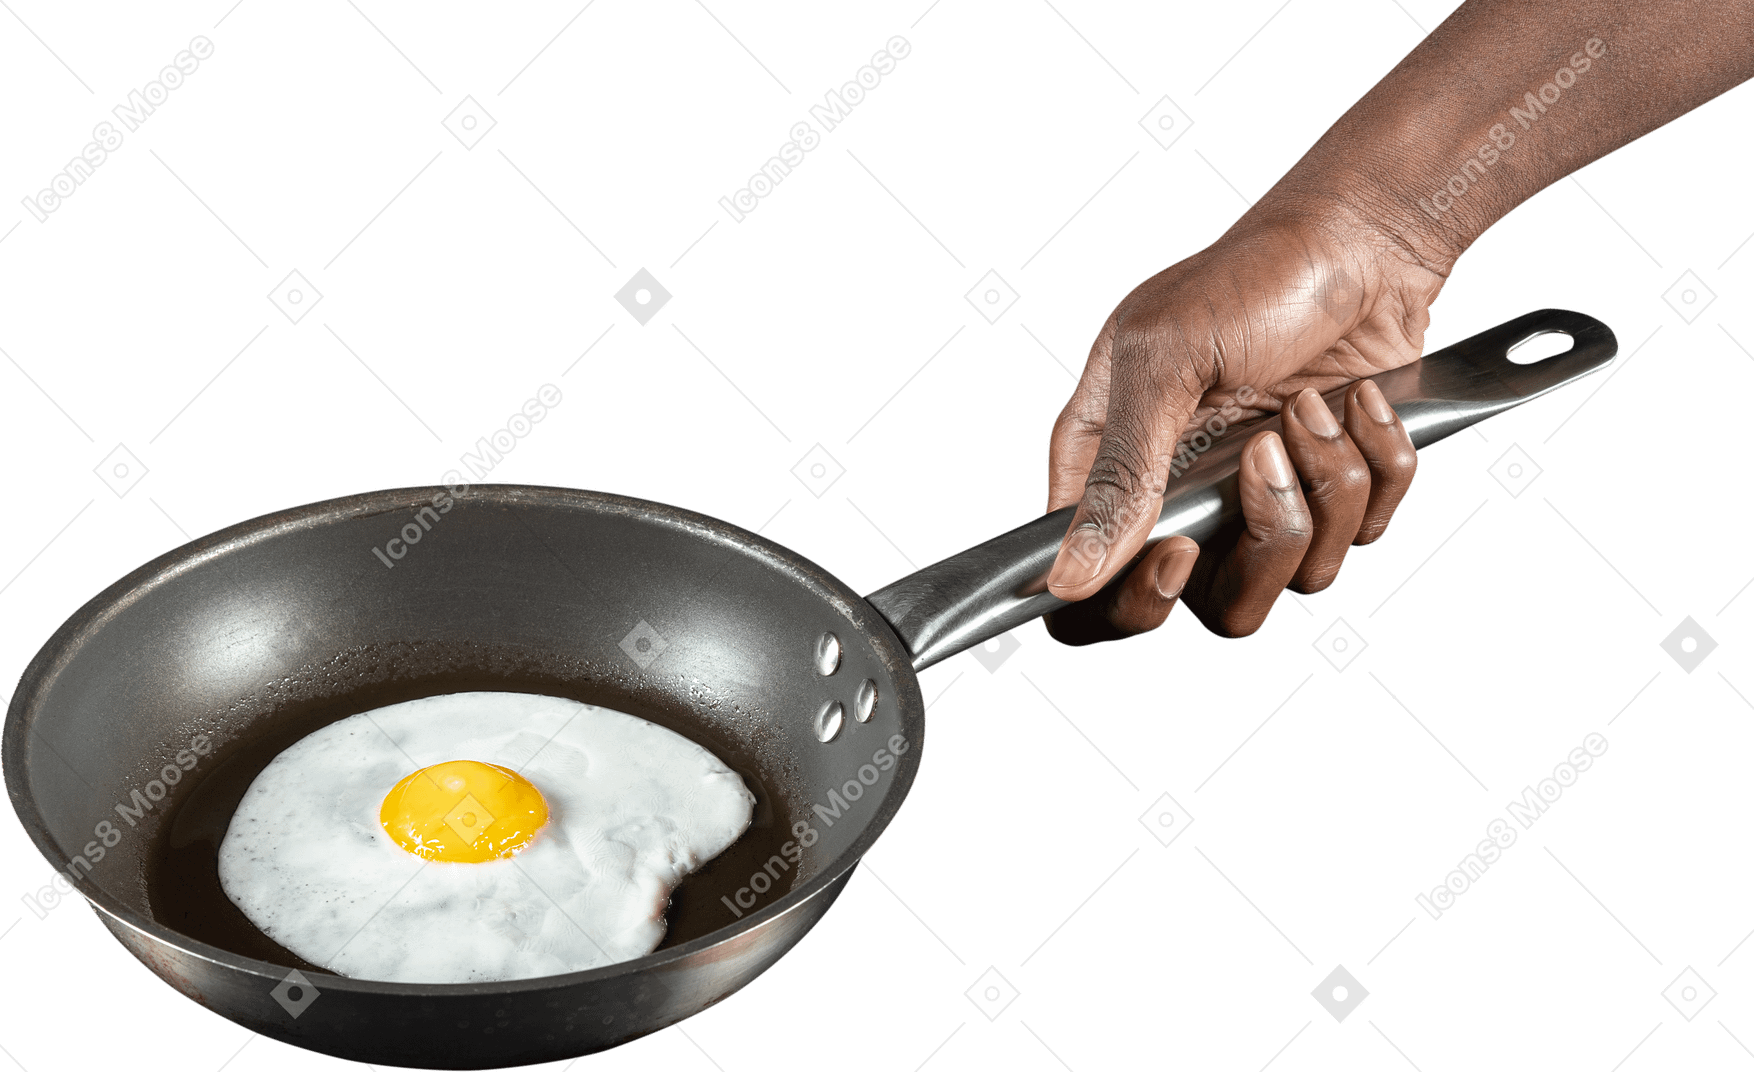 Human arm holding a fried egg on pan